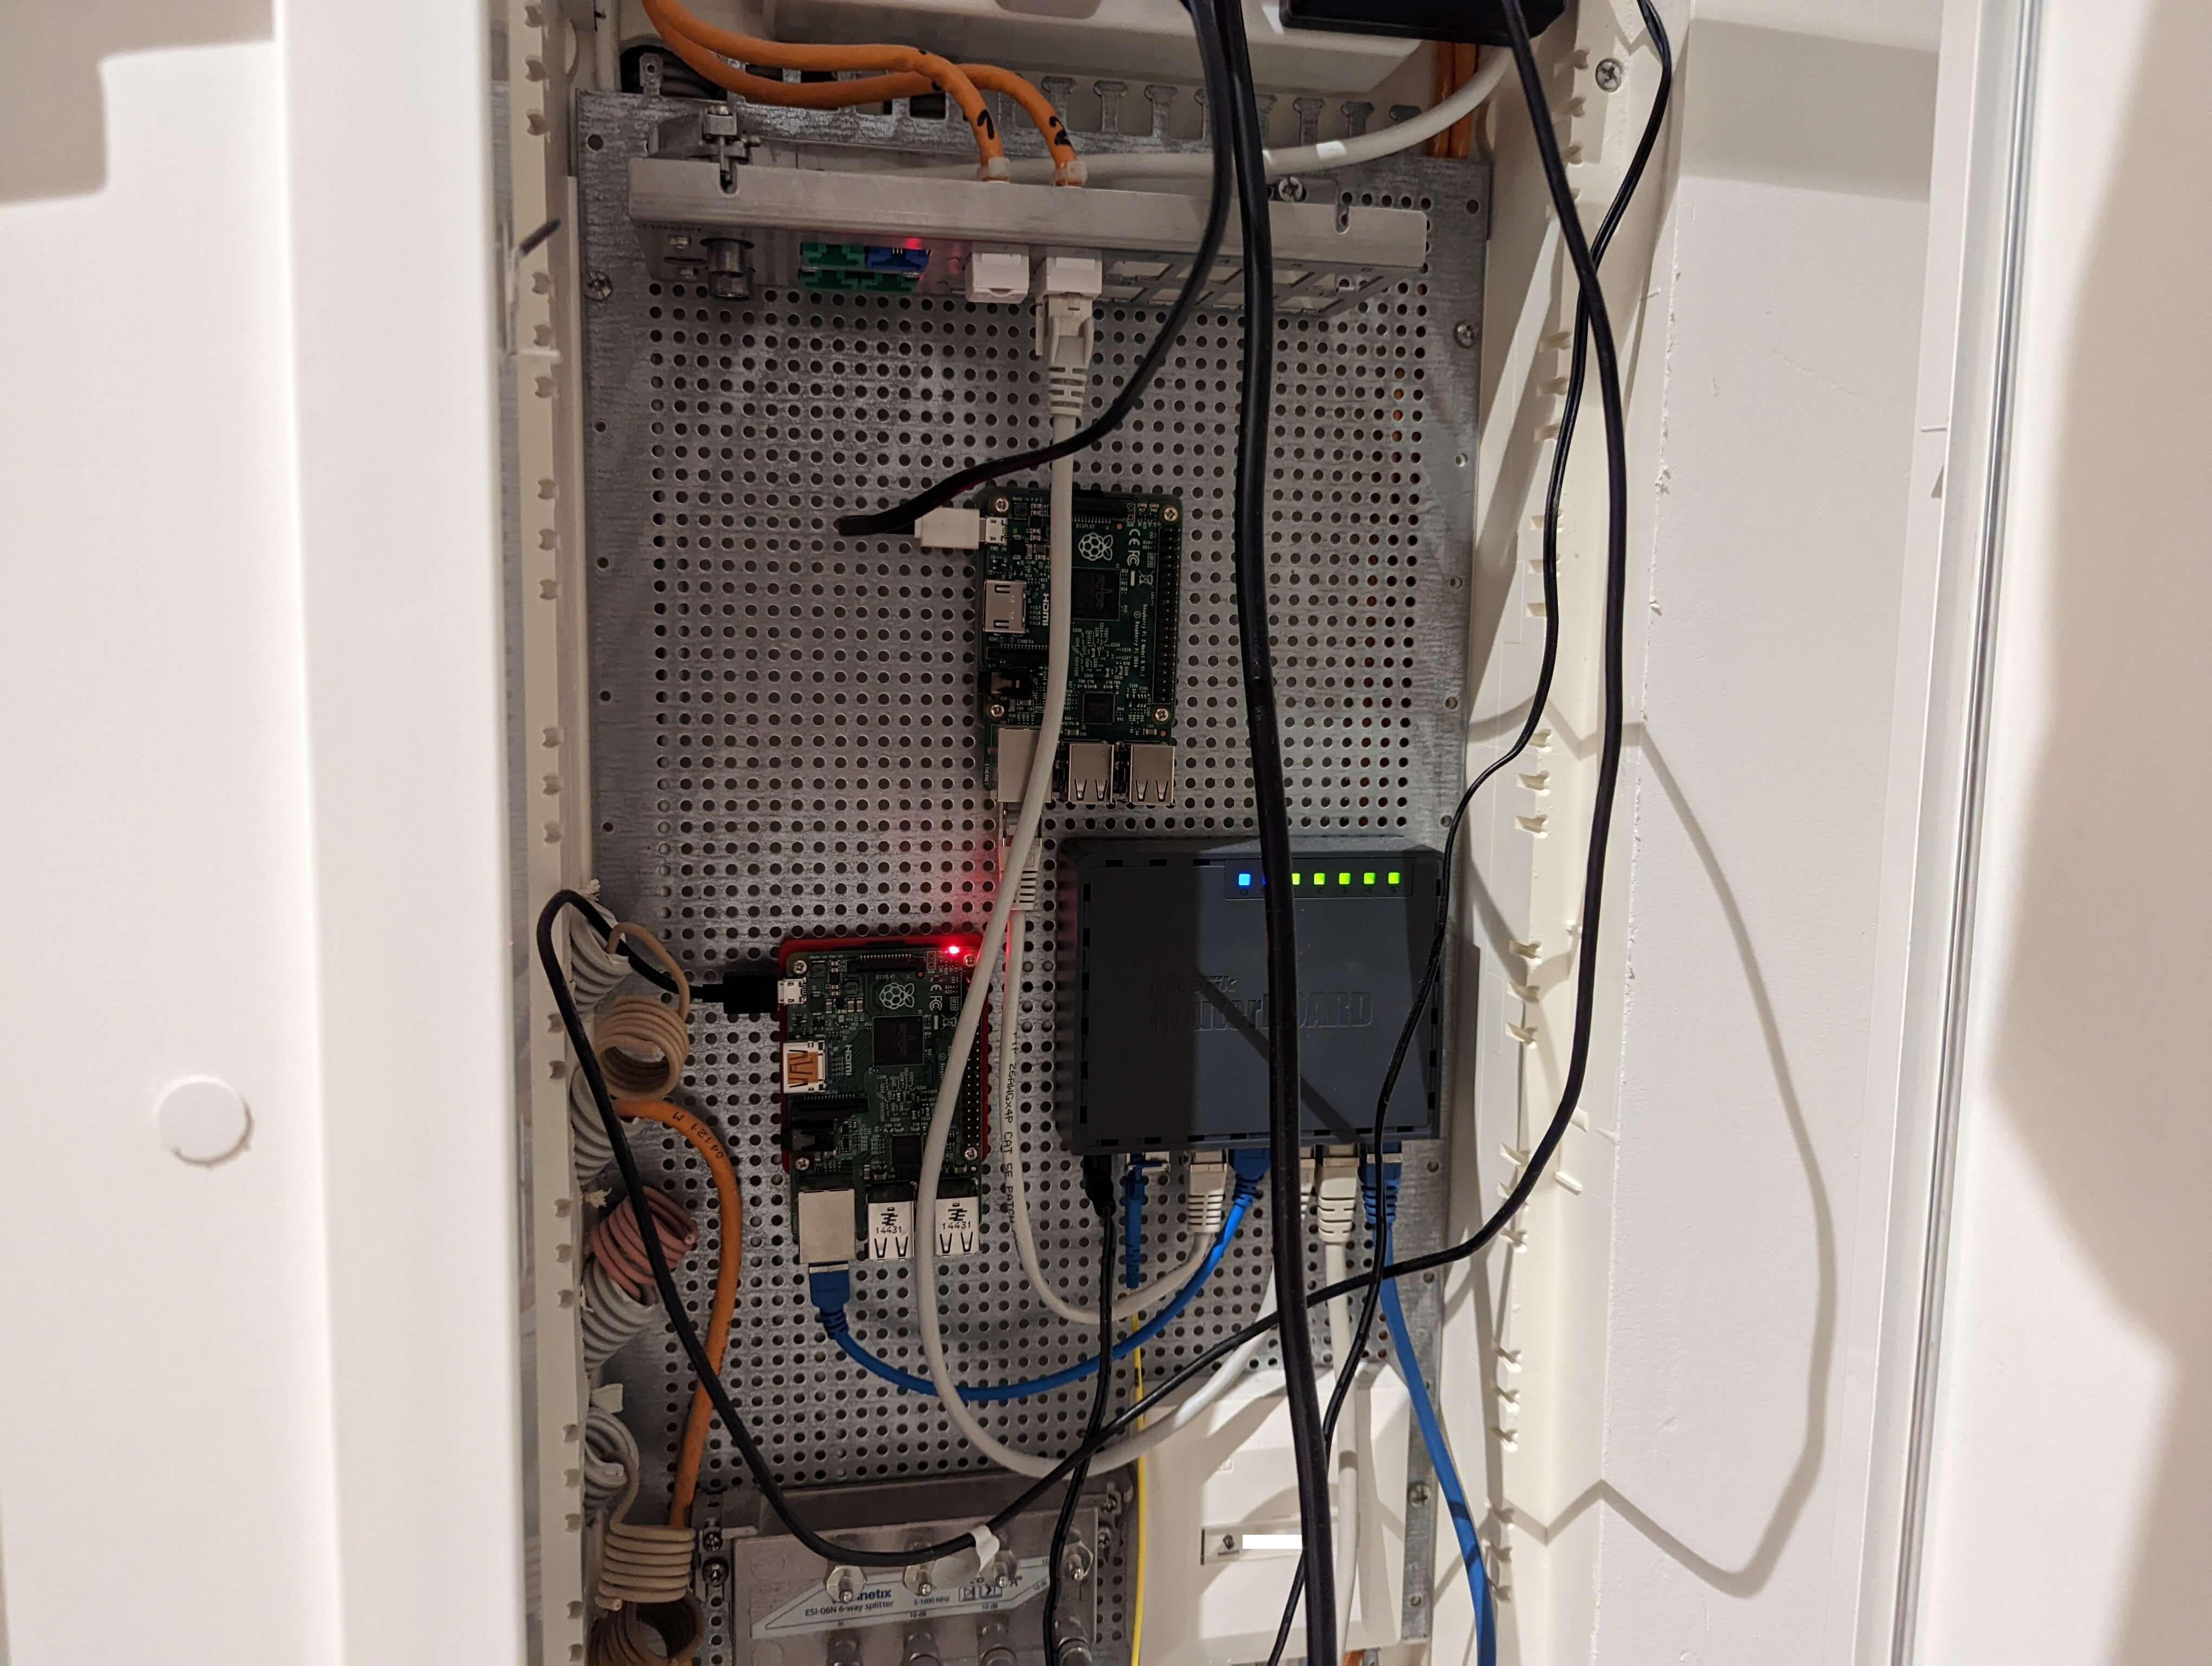 hEX S and both Raspberry Pi mounted on wall plate